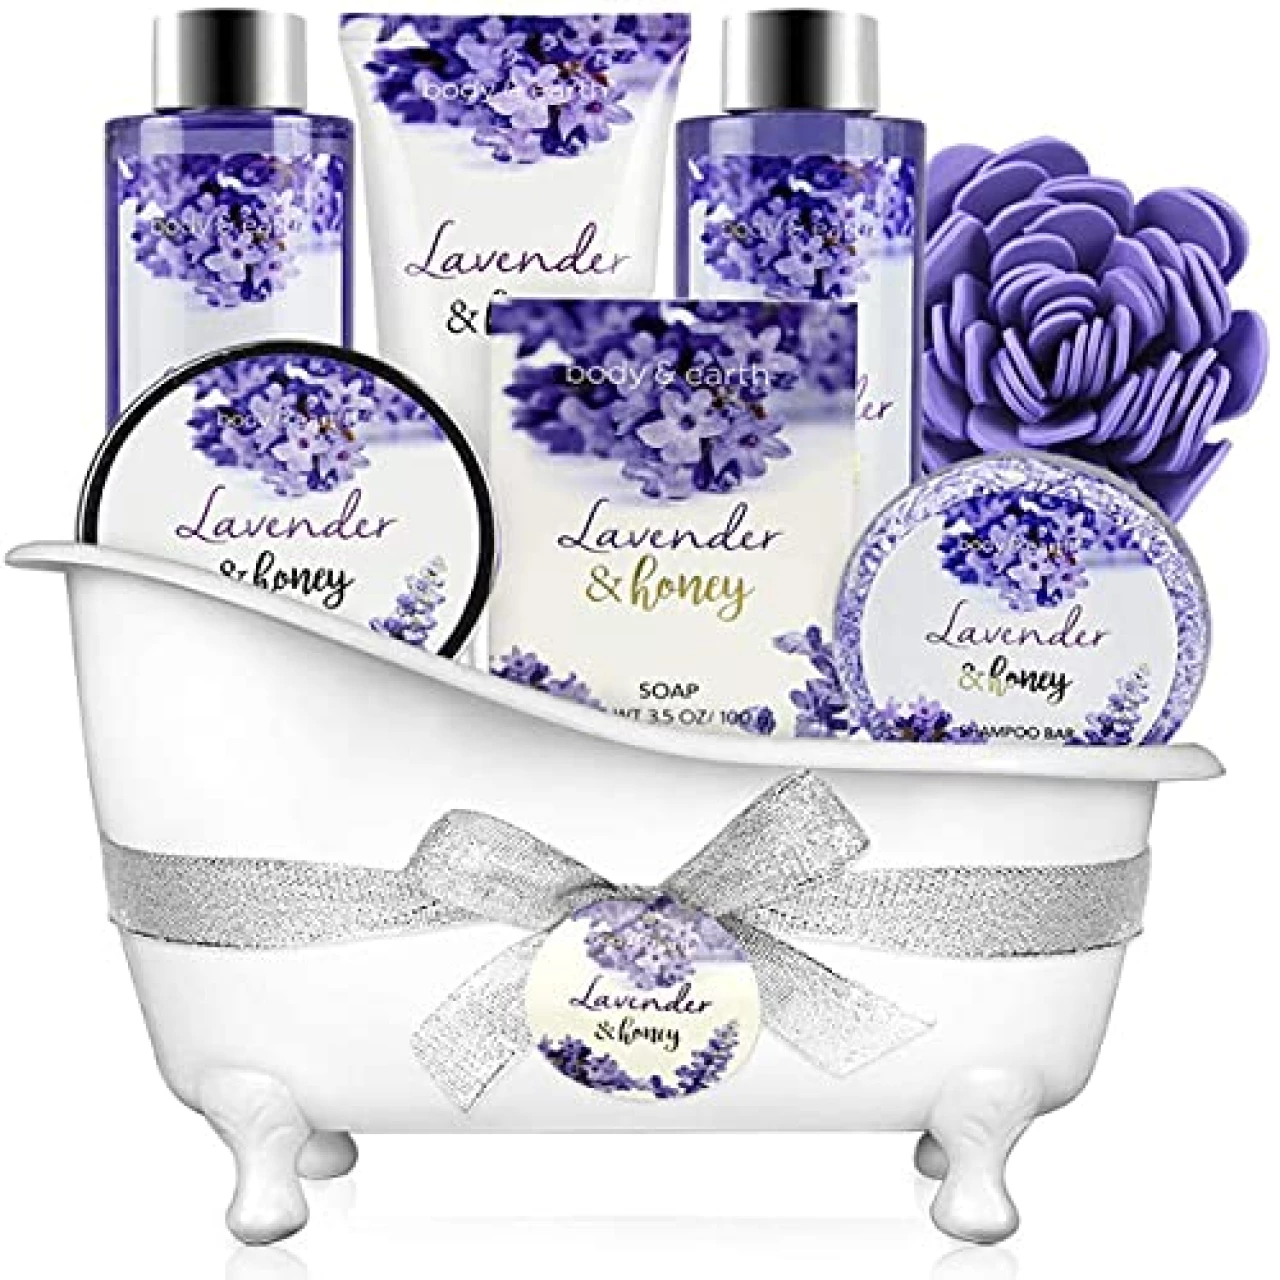 Bath and Body Gift Set - Lavender Gift Baskets for Women, Body &amp; Earth Bubble Bath Set 8 Pcs Lavender Honey Scent with Shower Gel, Lotion Set, Soap, Birthday Gifts for Dad Mom, Christmas Gifts for Her